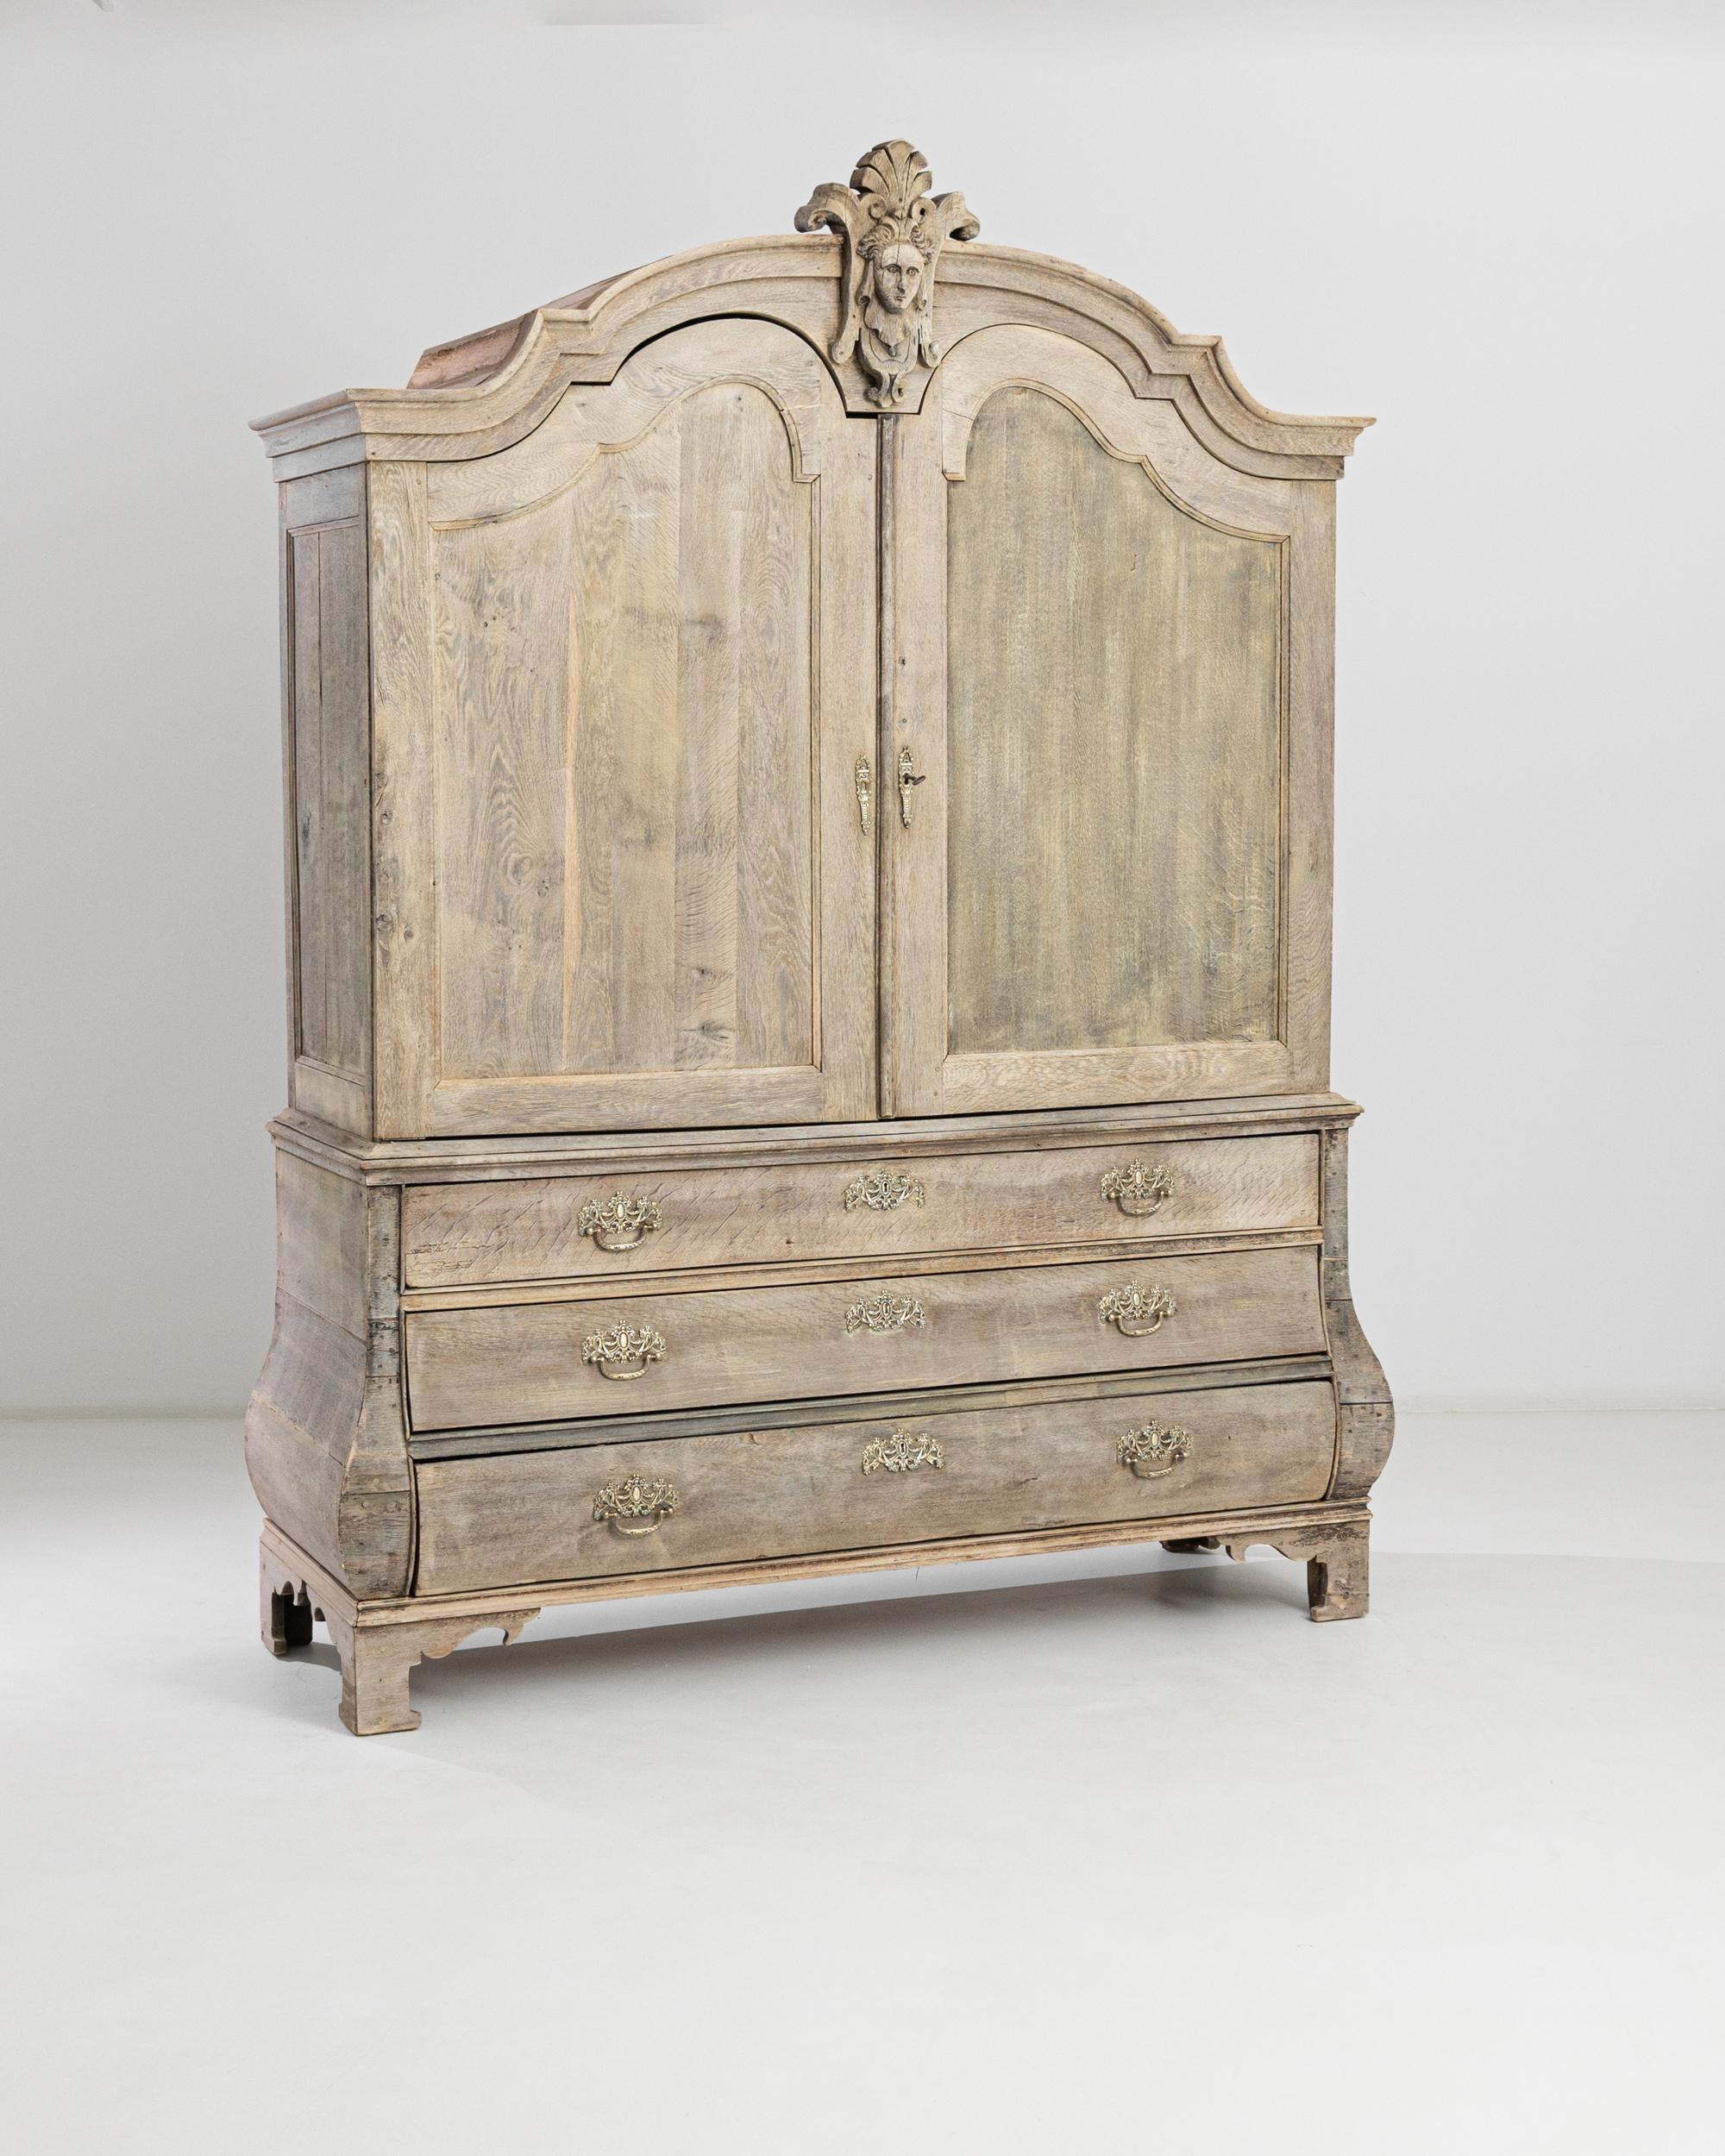 A bleached oak cabinet from the Netherlands, produced circa 1800. Standing nearly eight feet tall on cornered feet, this elegant cabinet impresses with its presence. Featuring a double door upper cabinet holding several shelves and sliding drawers,